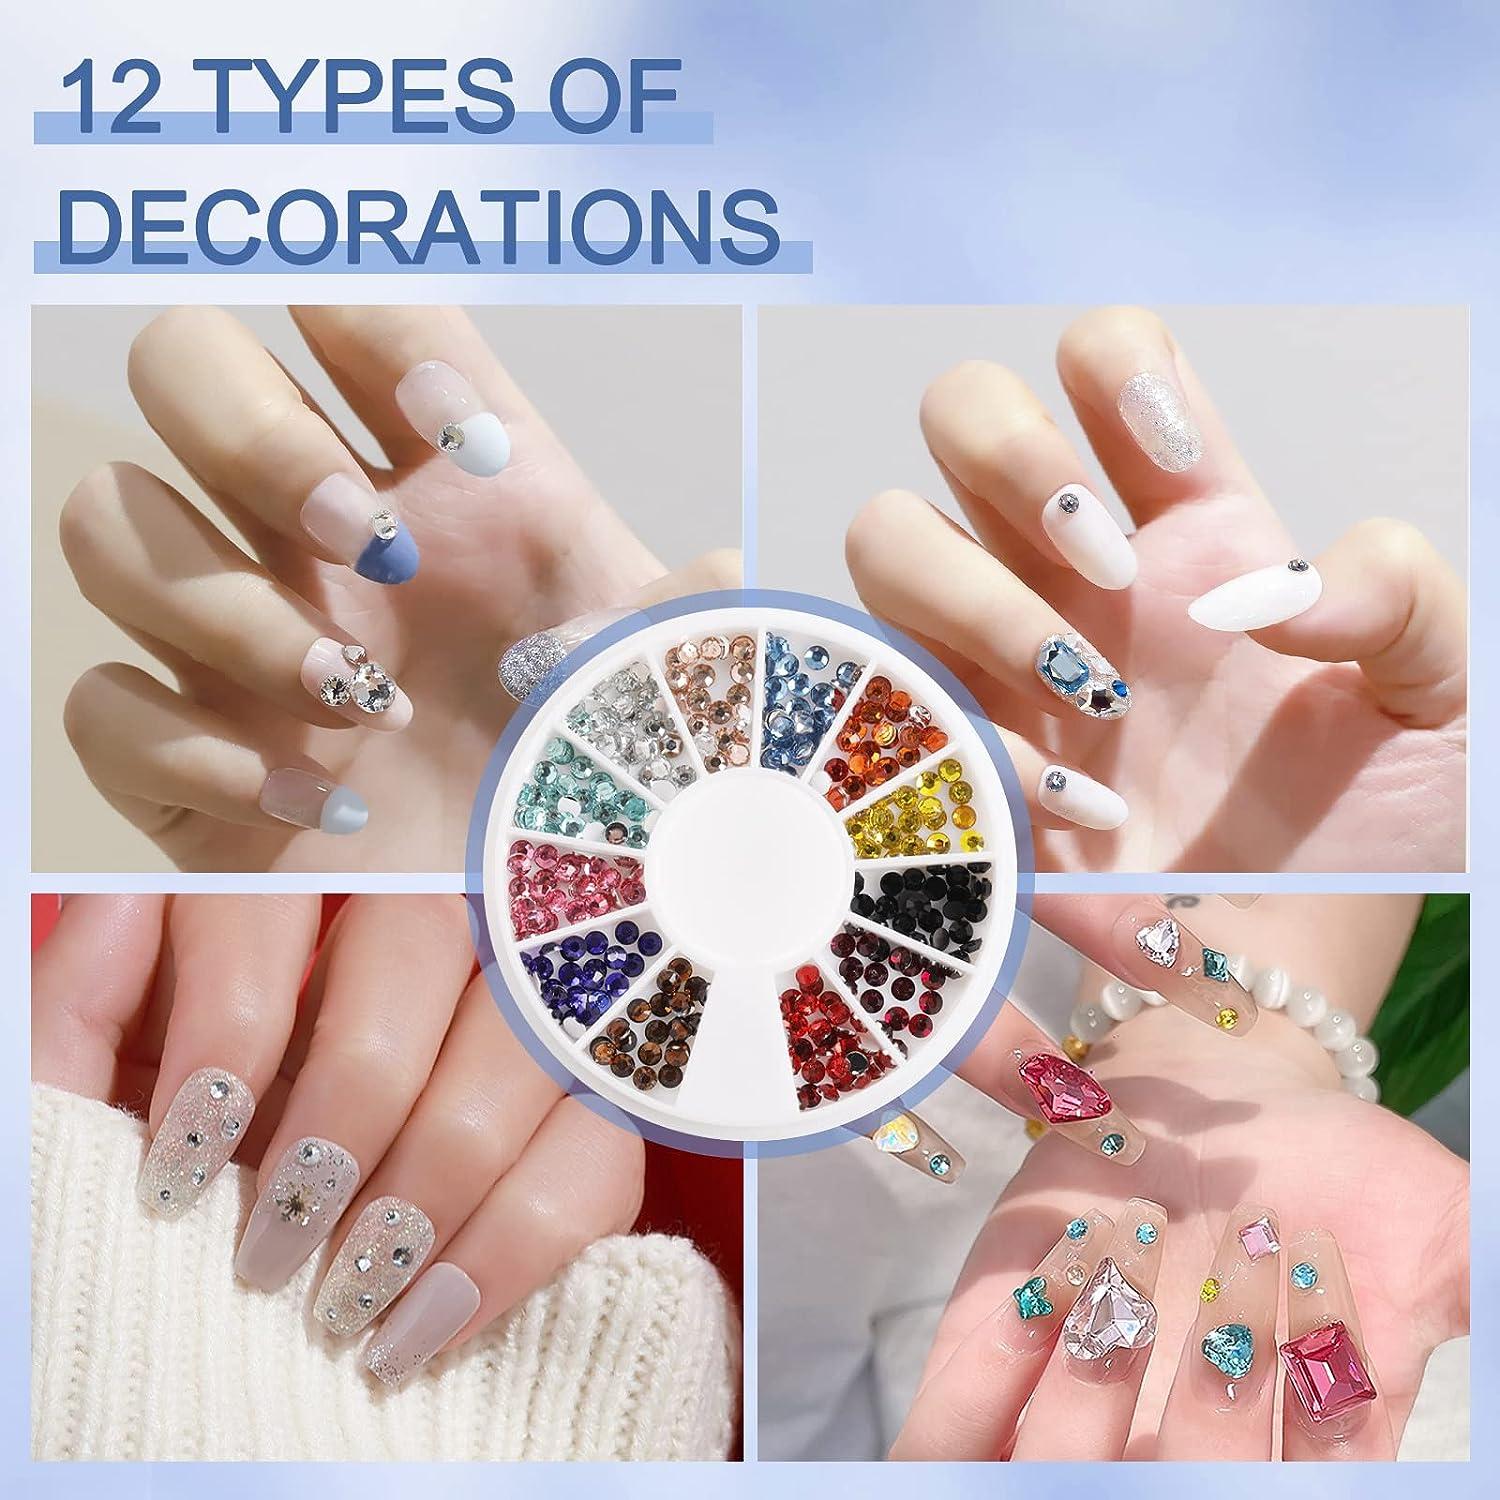  Nail Art 8ml/One Jar of Wipe-Off Rhinestone Glue Gel Adhesive  Resin Gem Jewelry Diamond Polish Clear Decoration with Pen Tools (LED Light  Cure Needed) Thicker&More Sticky Than Others : Beauty 